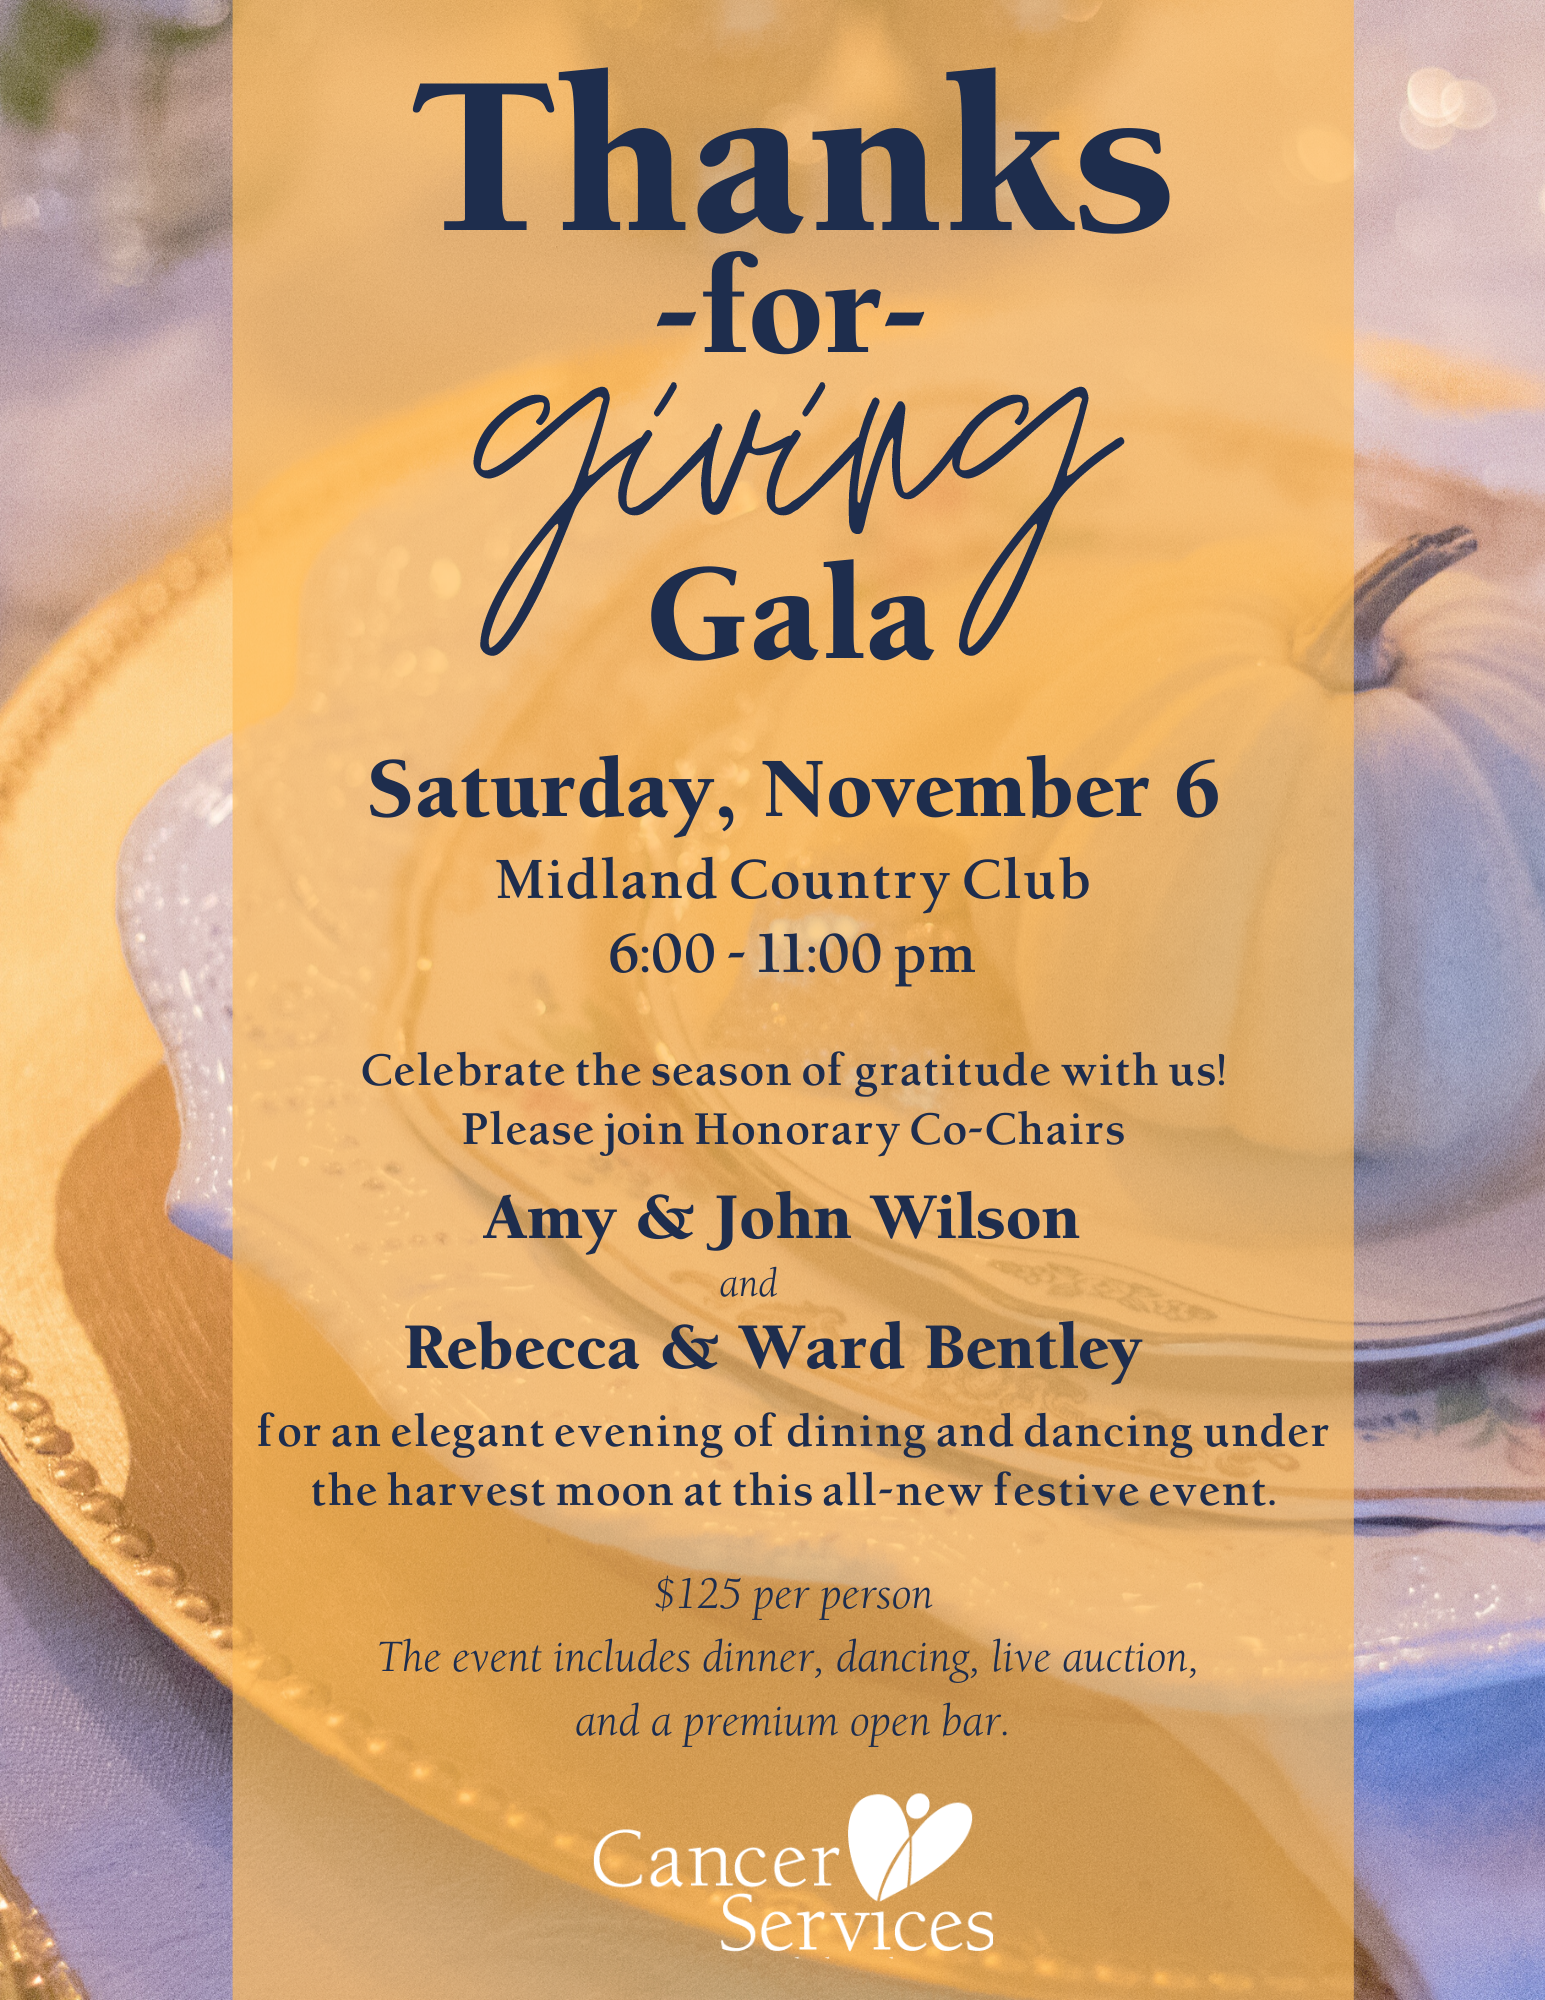 Thanks-for-giving Gala Flyer image